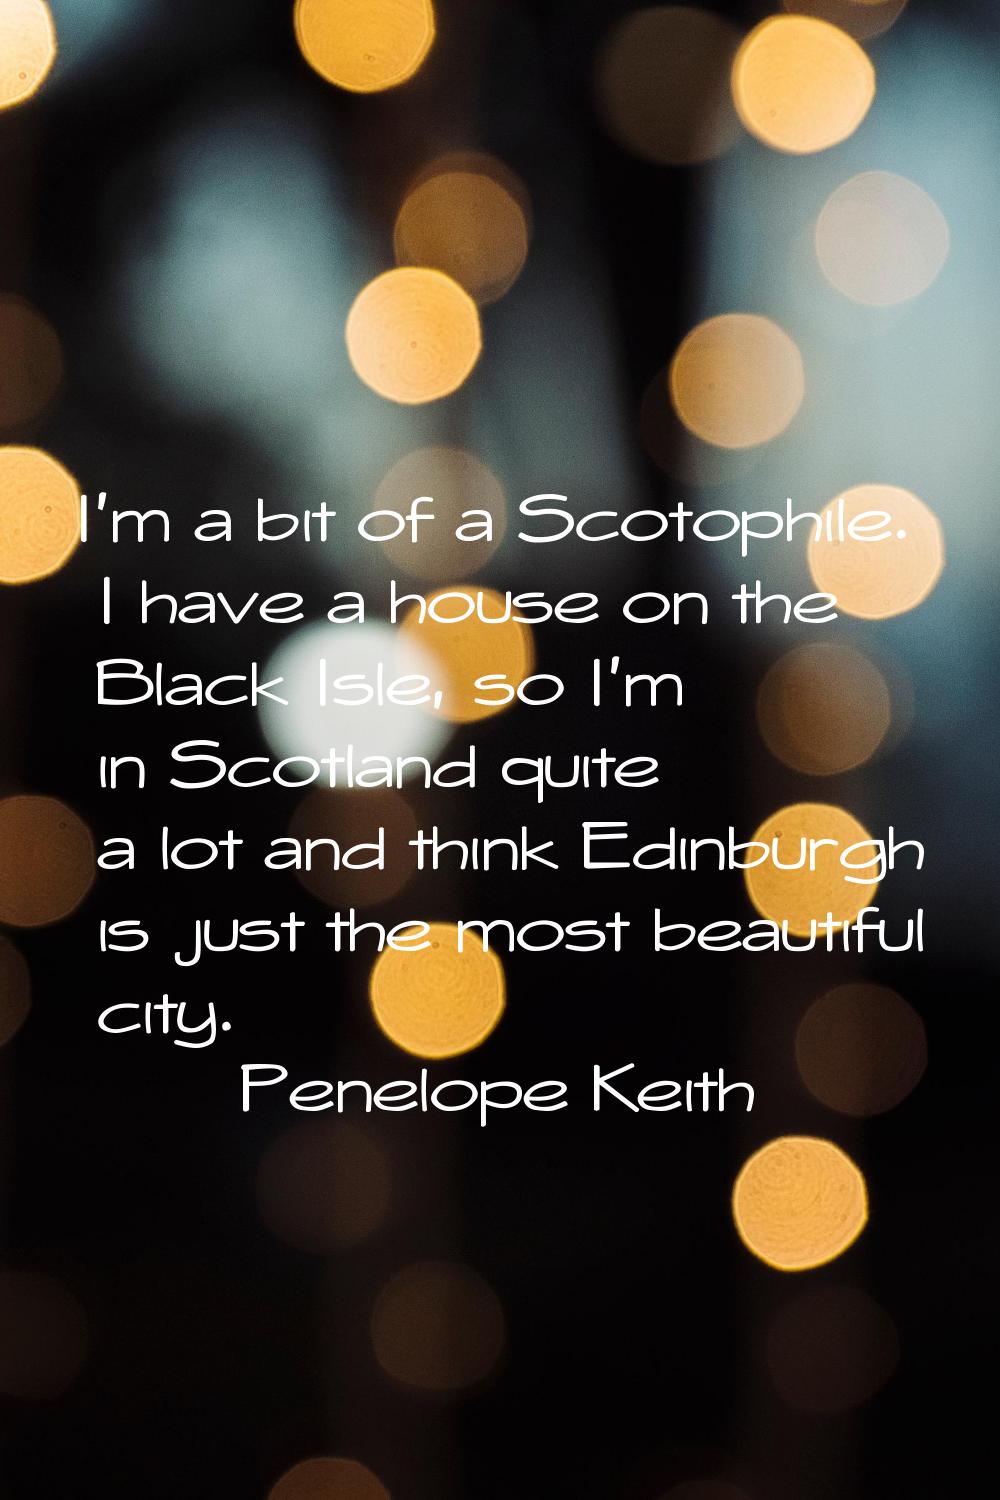 I'm a bit of a Scotophile. I have a house on the Black Isle, so I'm in Scotland quite a lot and thi